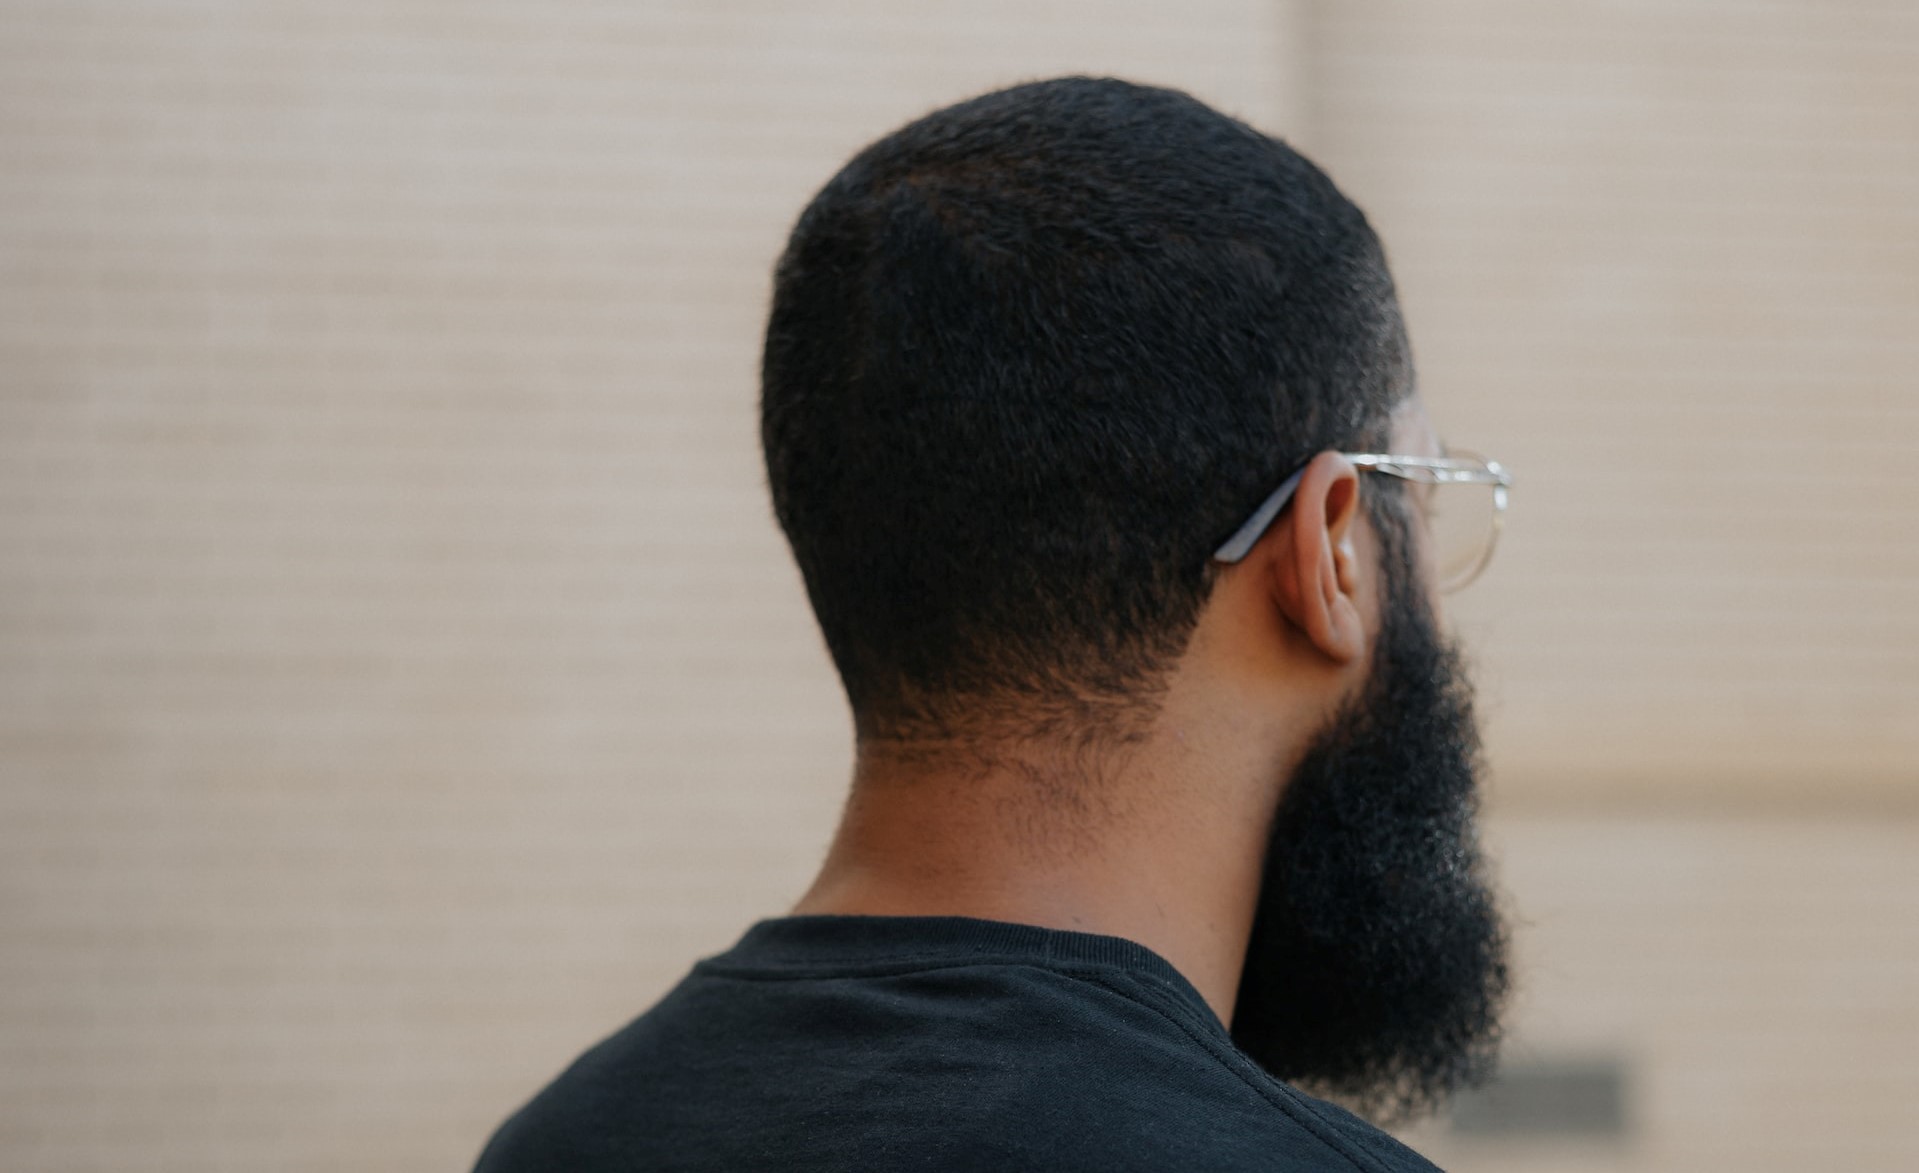 Back of the head of a man with a beard.